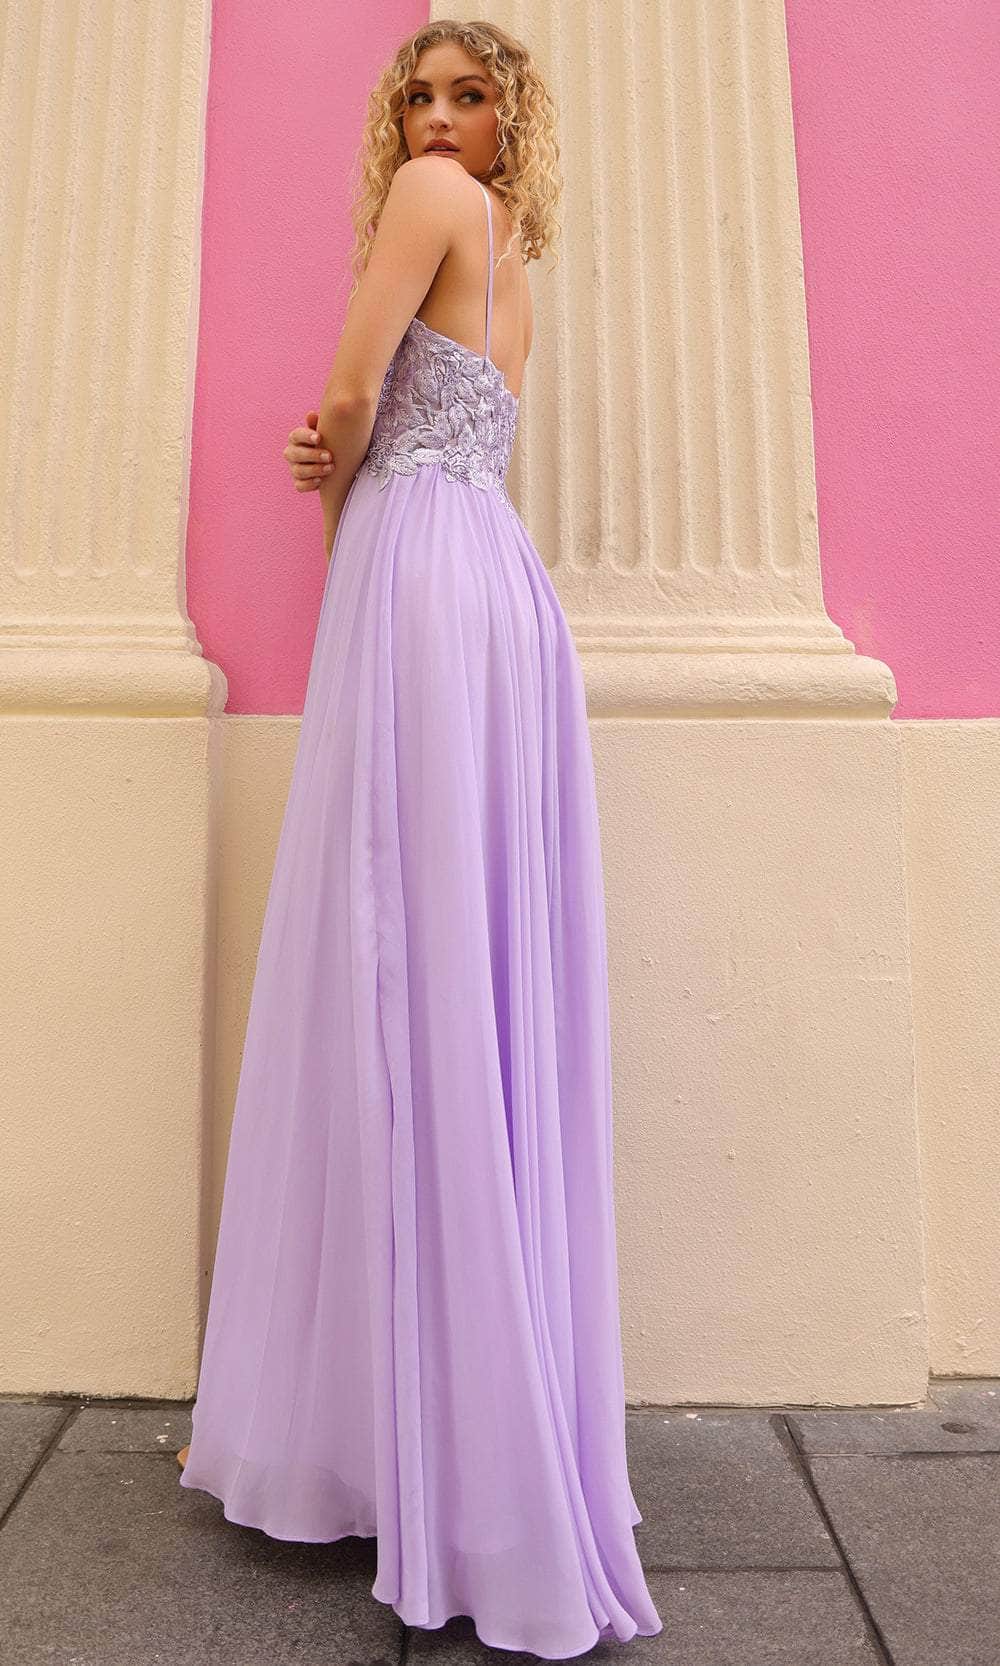 Nox Anabel C1462 - Spaghetti Strap A-Line Prom Dress Special Occasion Dresses 